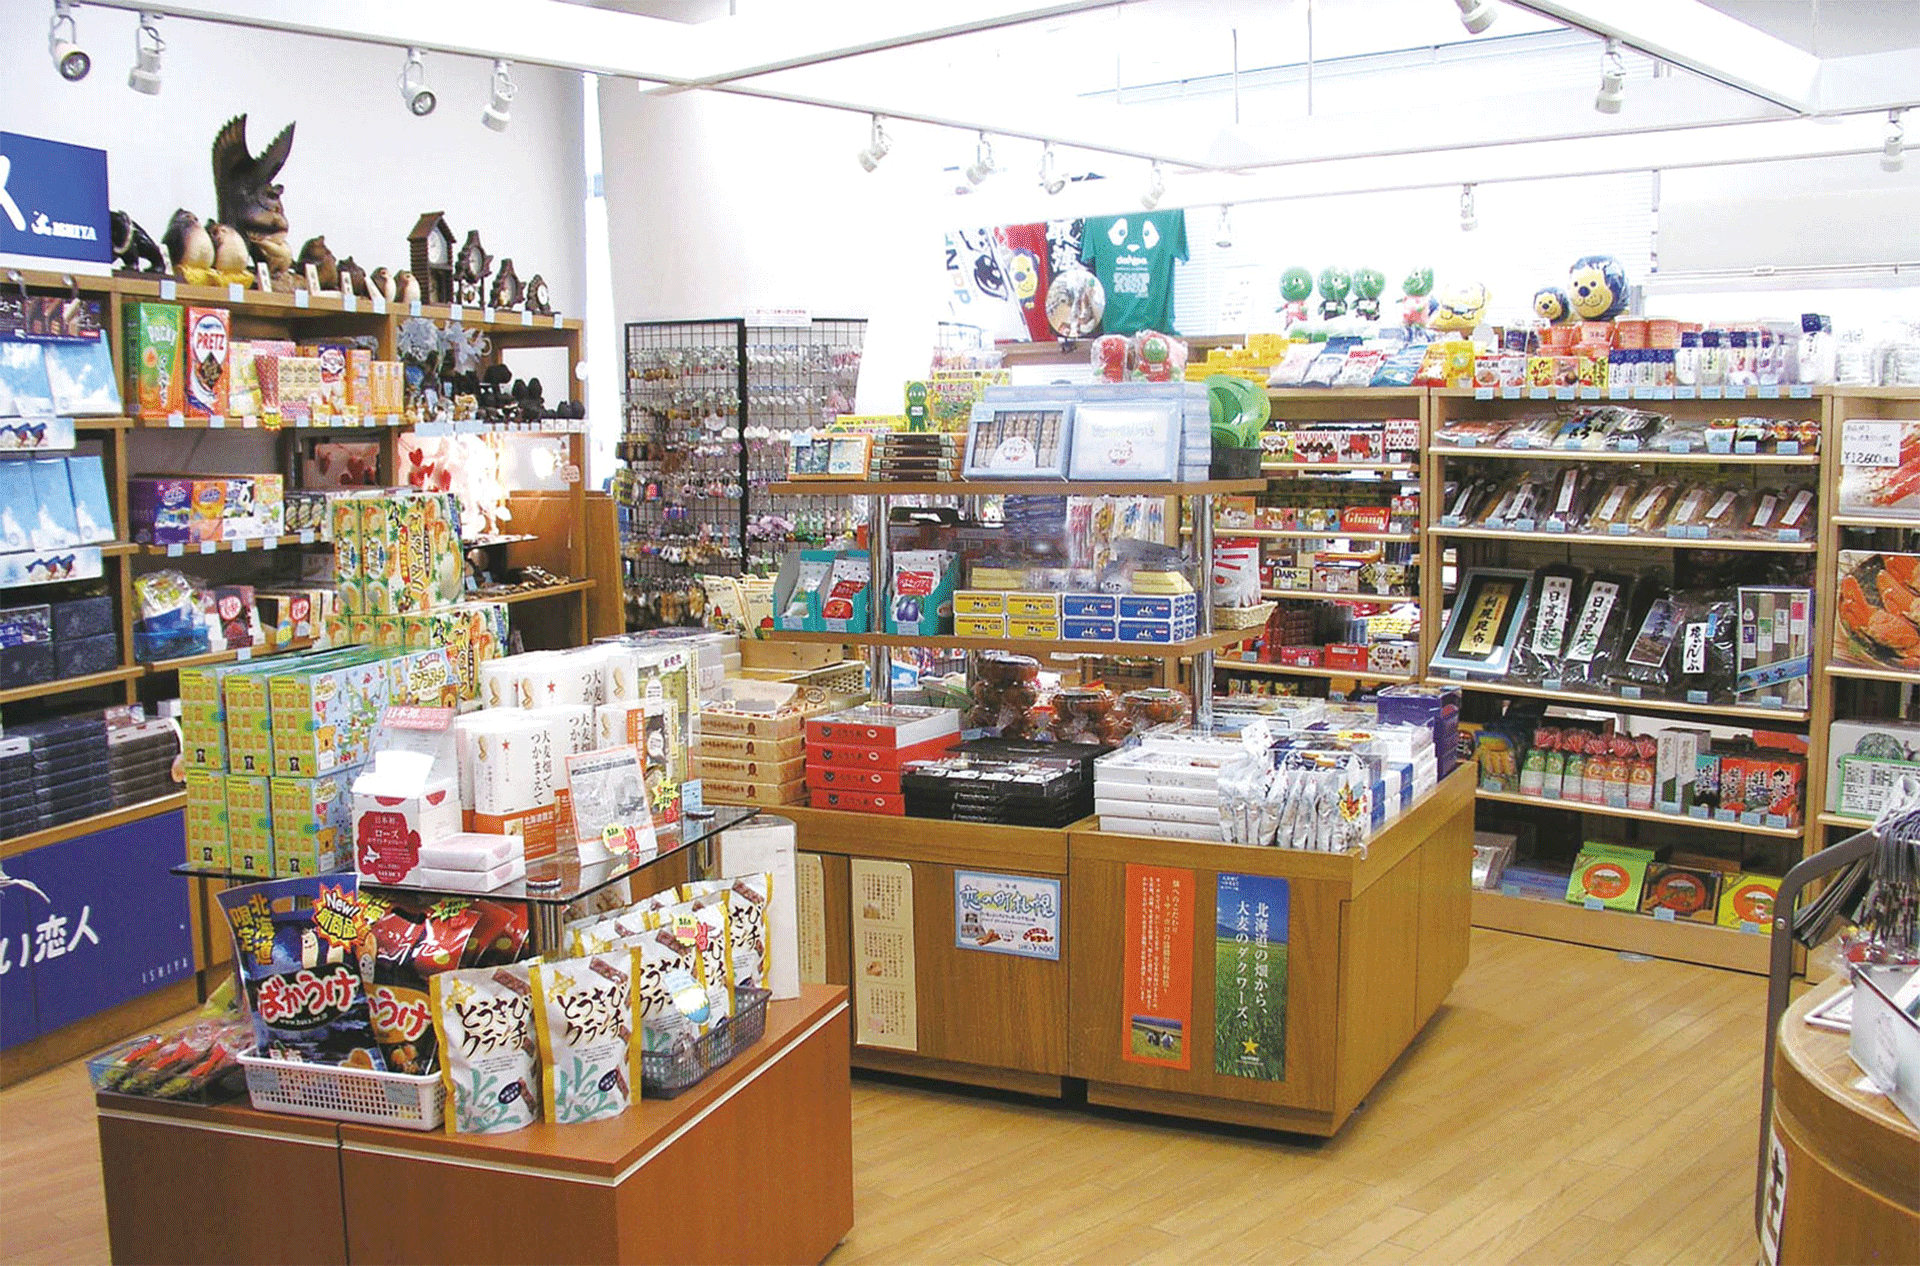 Hokkaido local products available at the gift shop (Dosan Market)